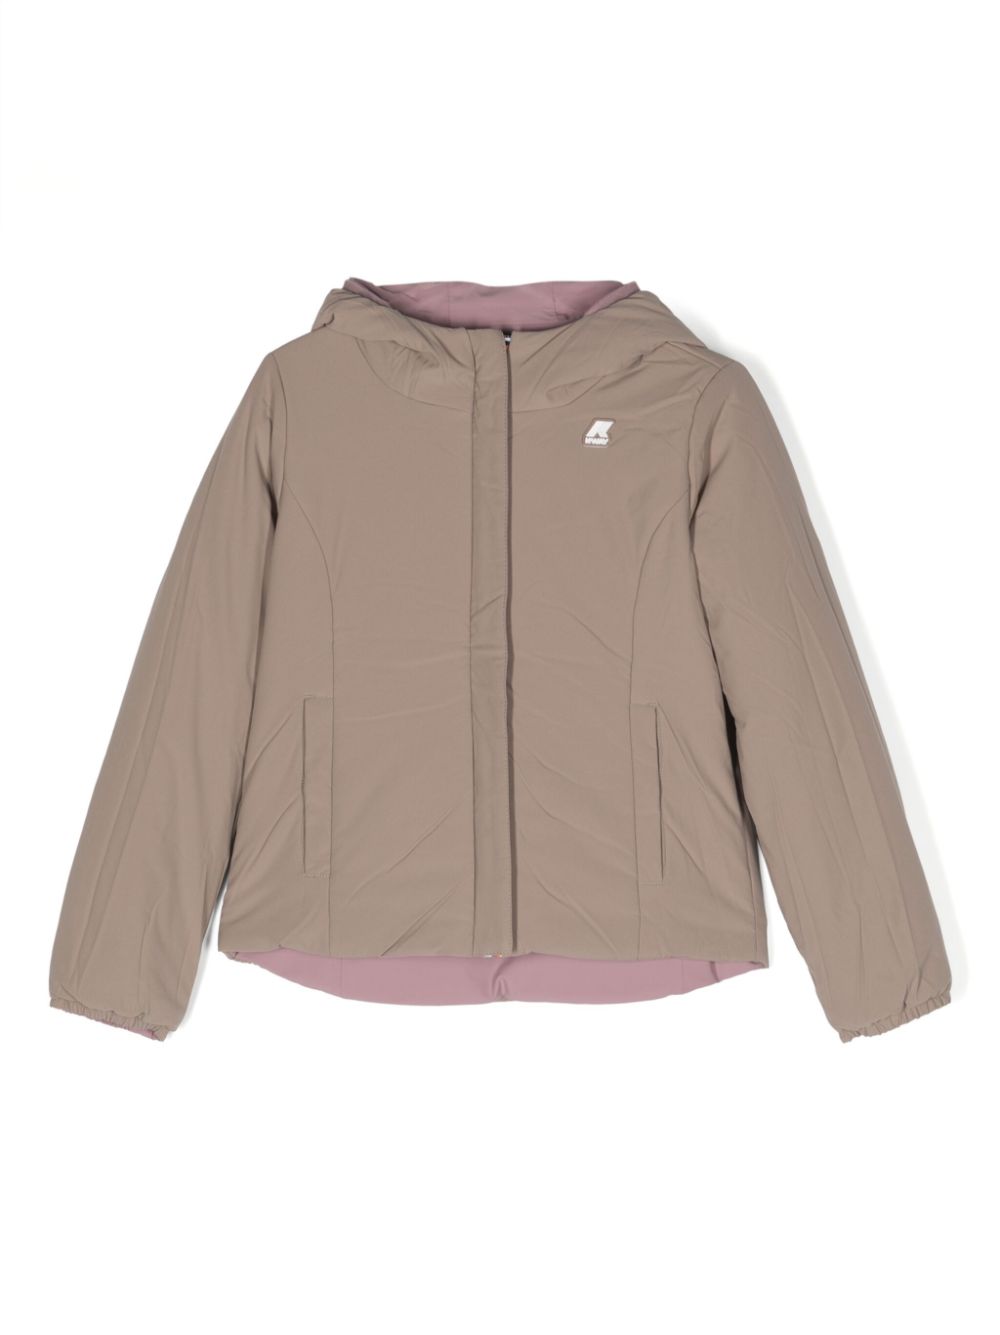 Mauve and beige reversible jacket for girls